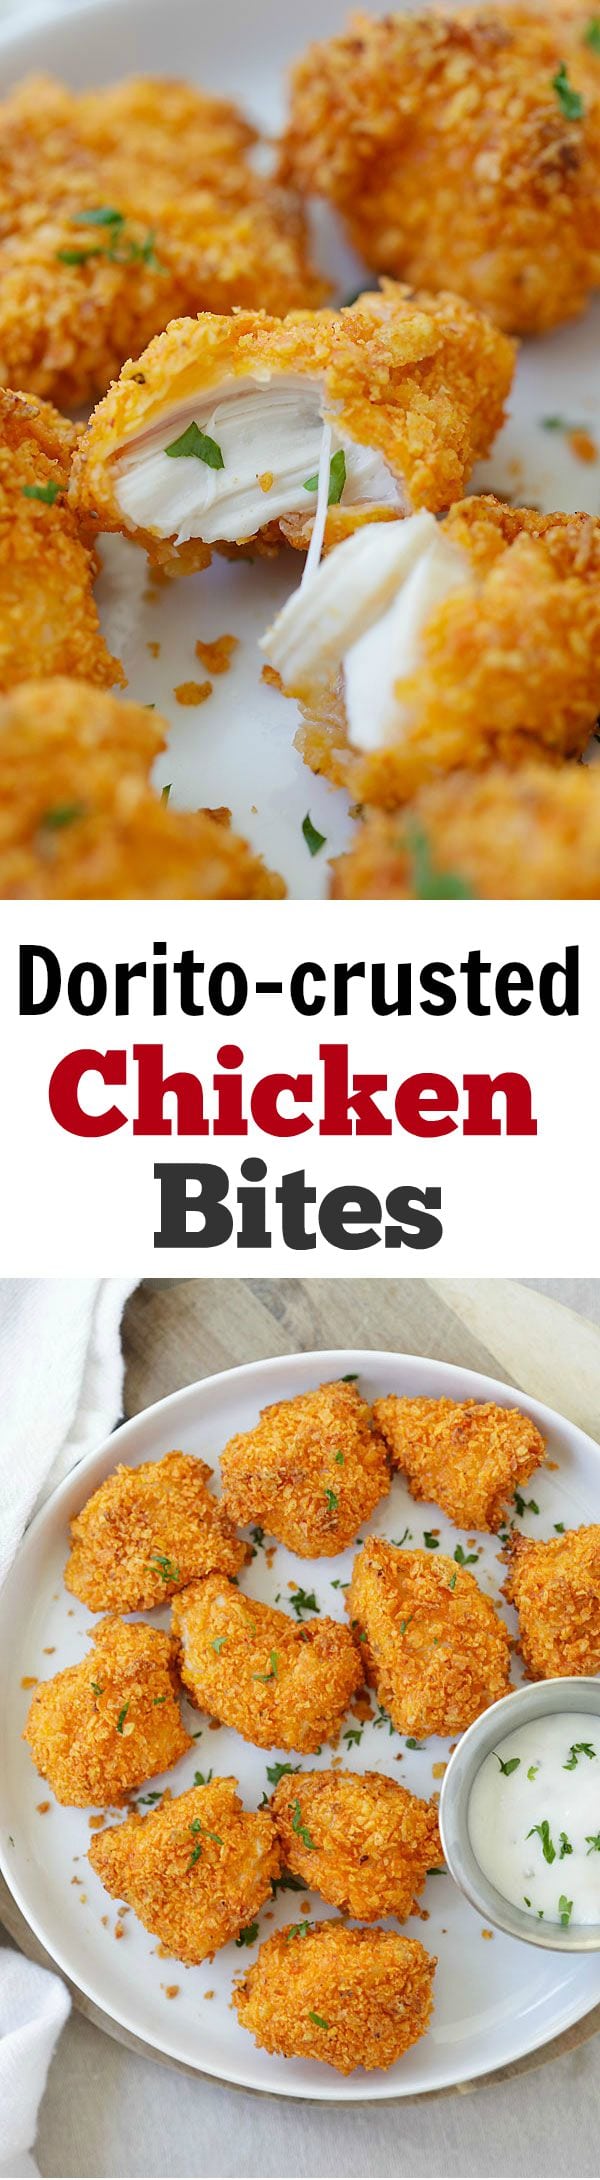 Dorito-crusted Chicken Bites – coated with crispy tortilla chips and baked to perfection. 10 minutes active time and dinner is ready! | rasamalaysia.com